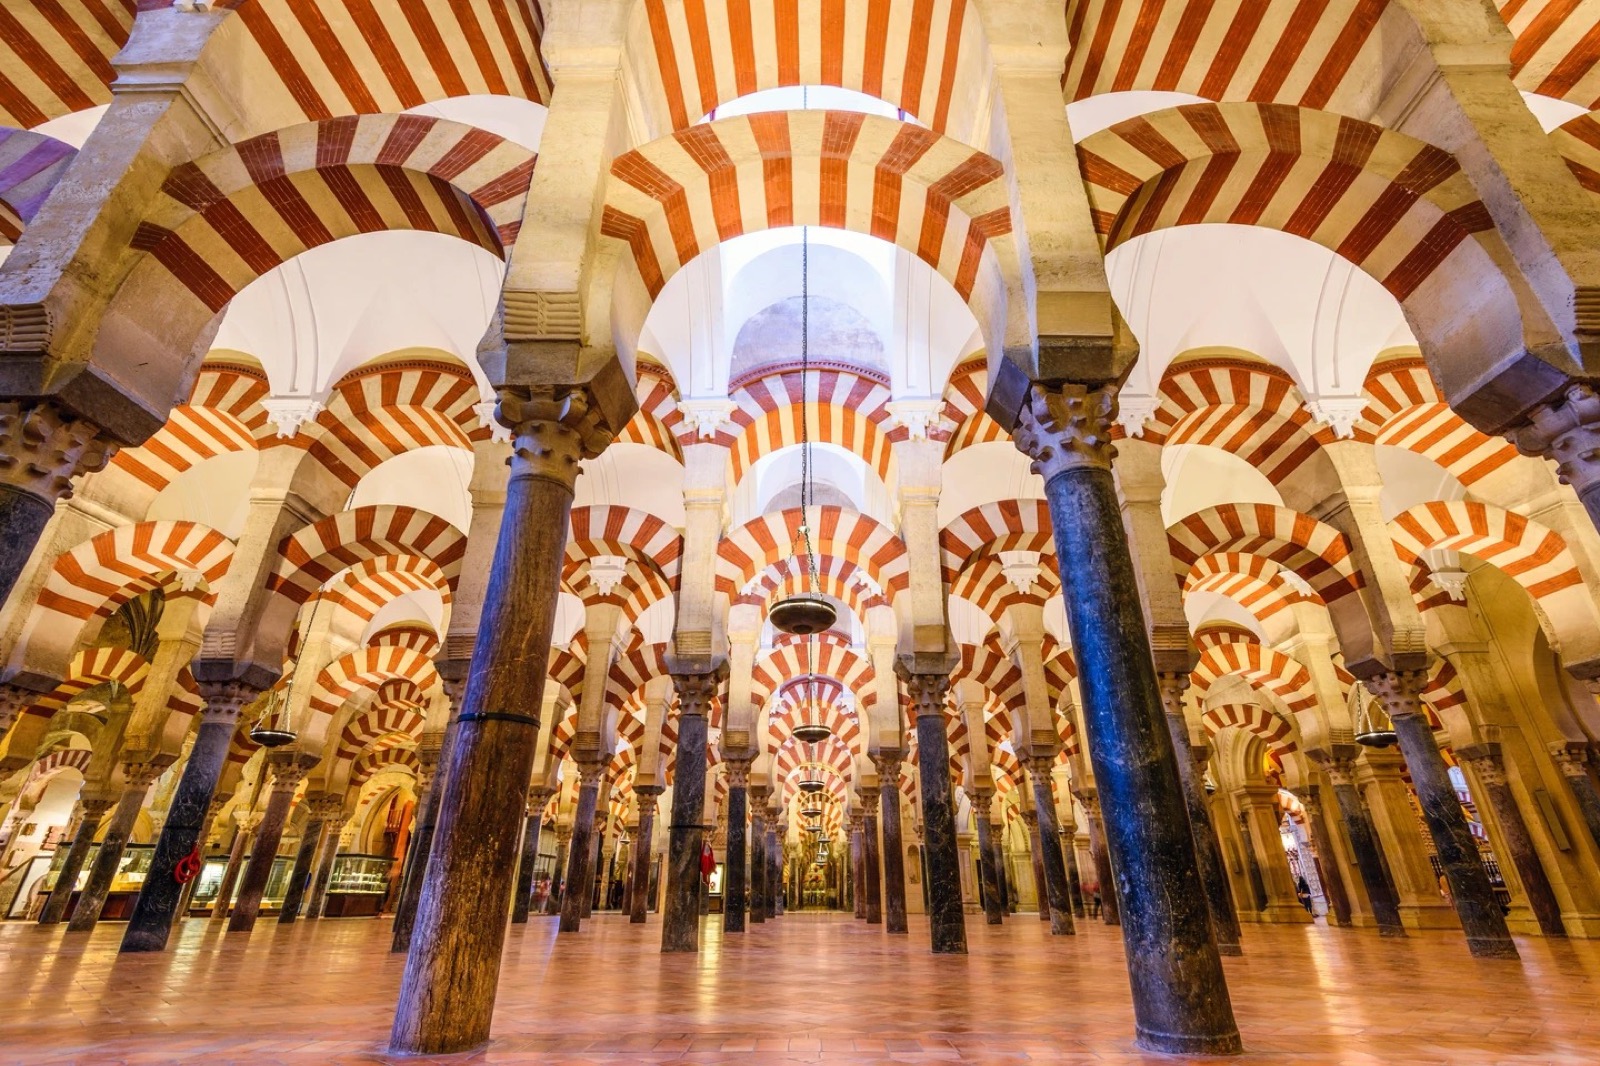 If You Can Score More Than 18 on This Famous Landmarks Quiz, You Probably Know All About the World Great Mosque of Cordoba, Spain